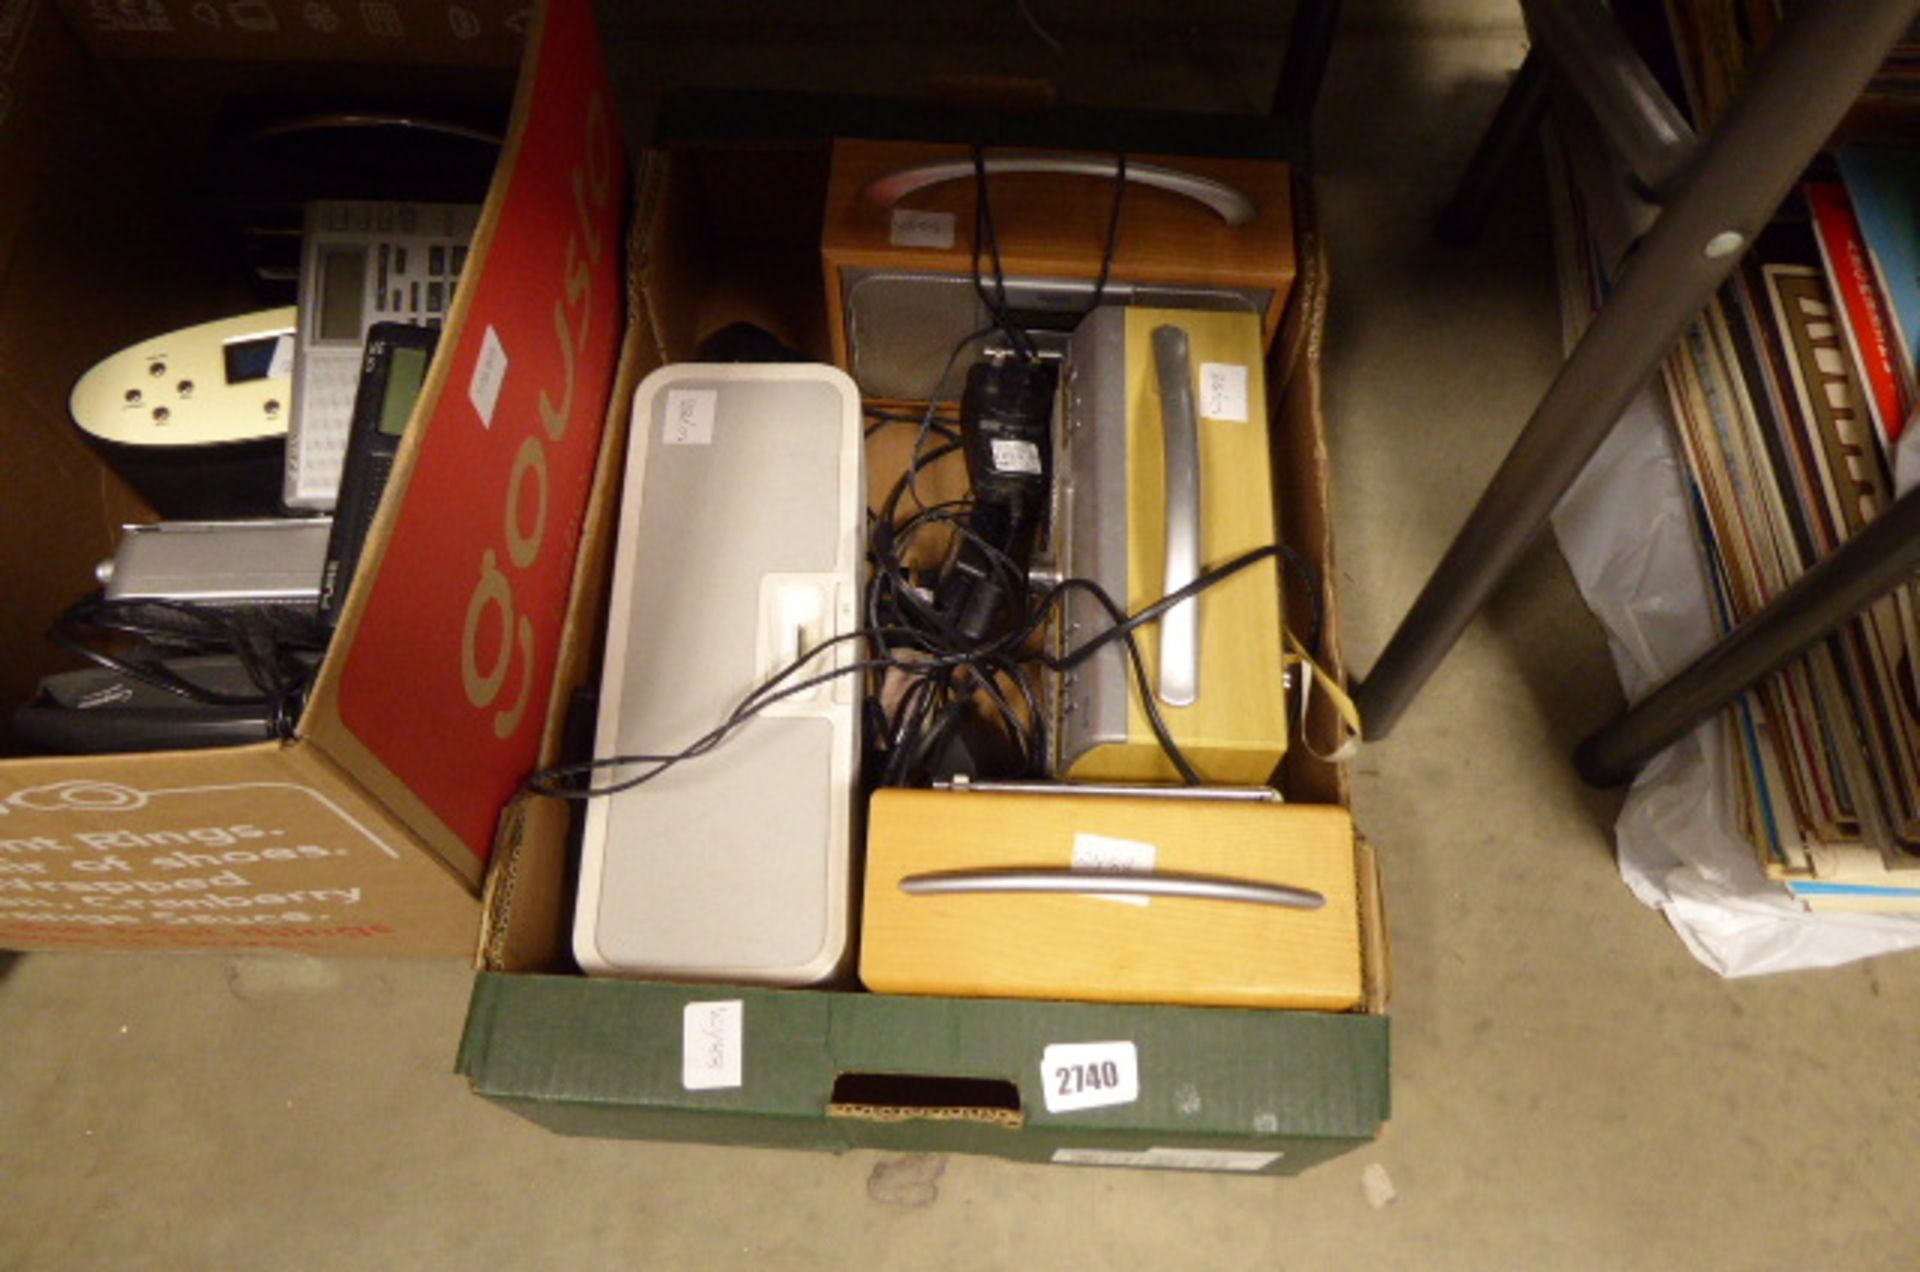 2669. Tray containing various DAB and FM radios by Bush, Tempo and others